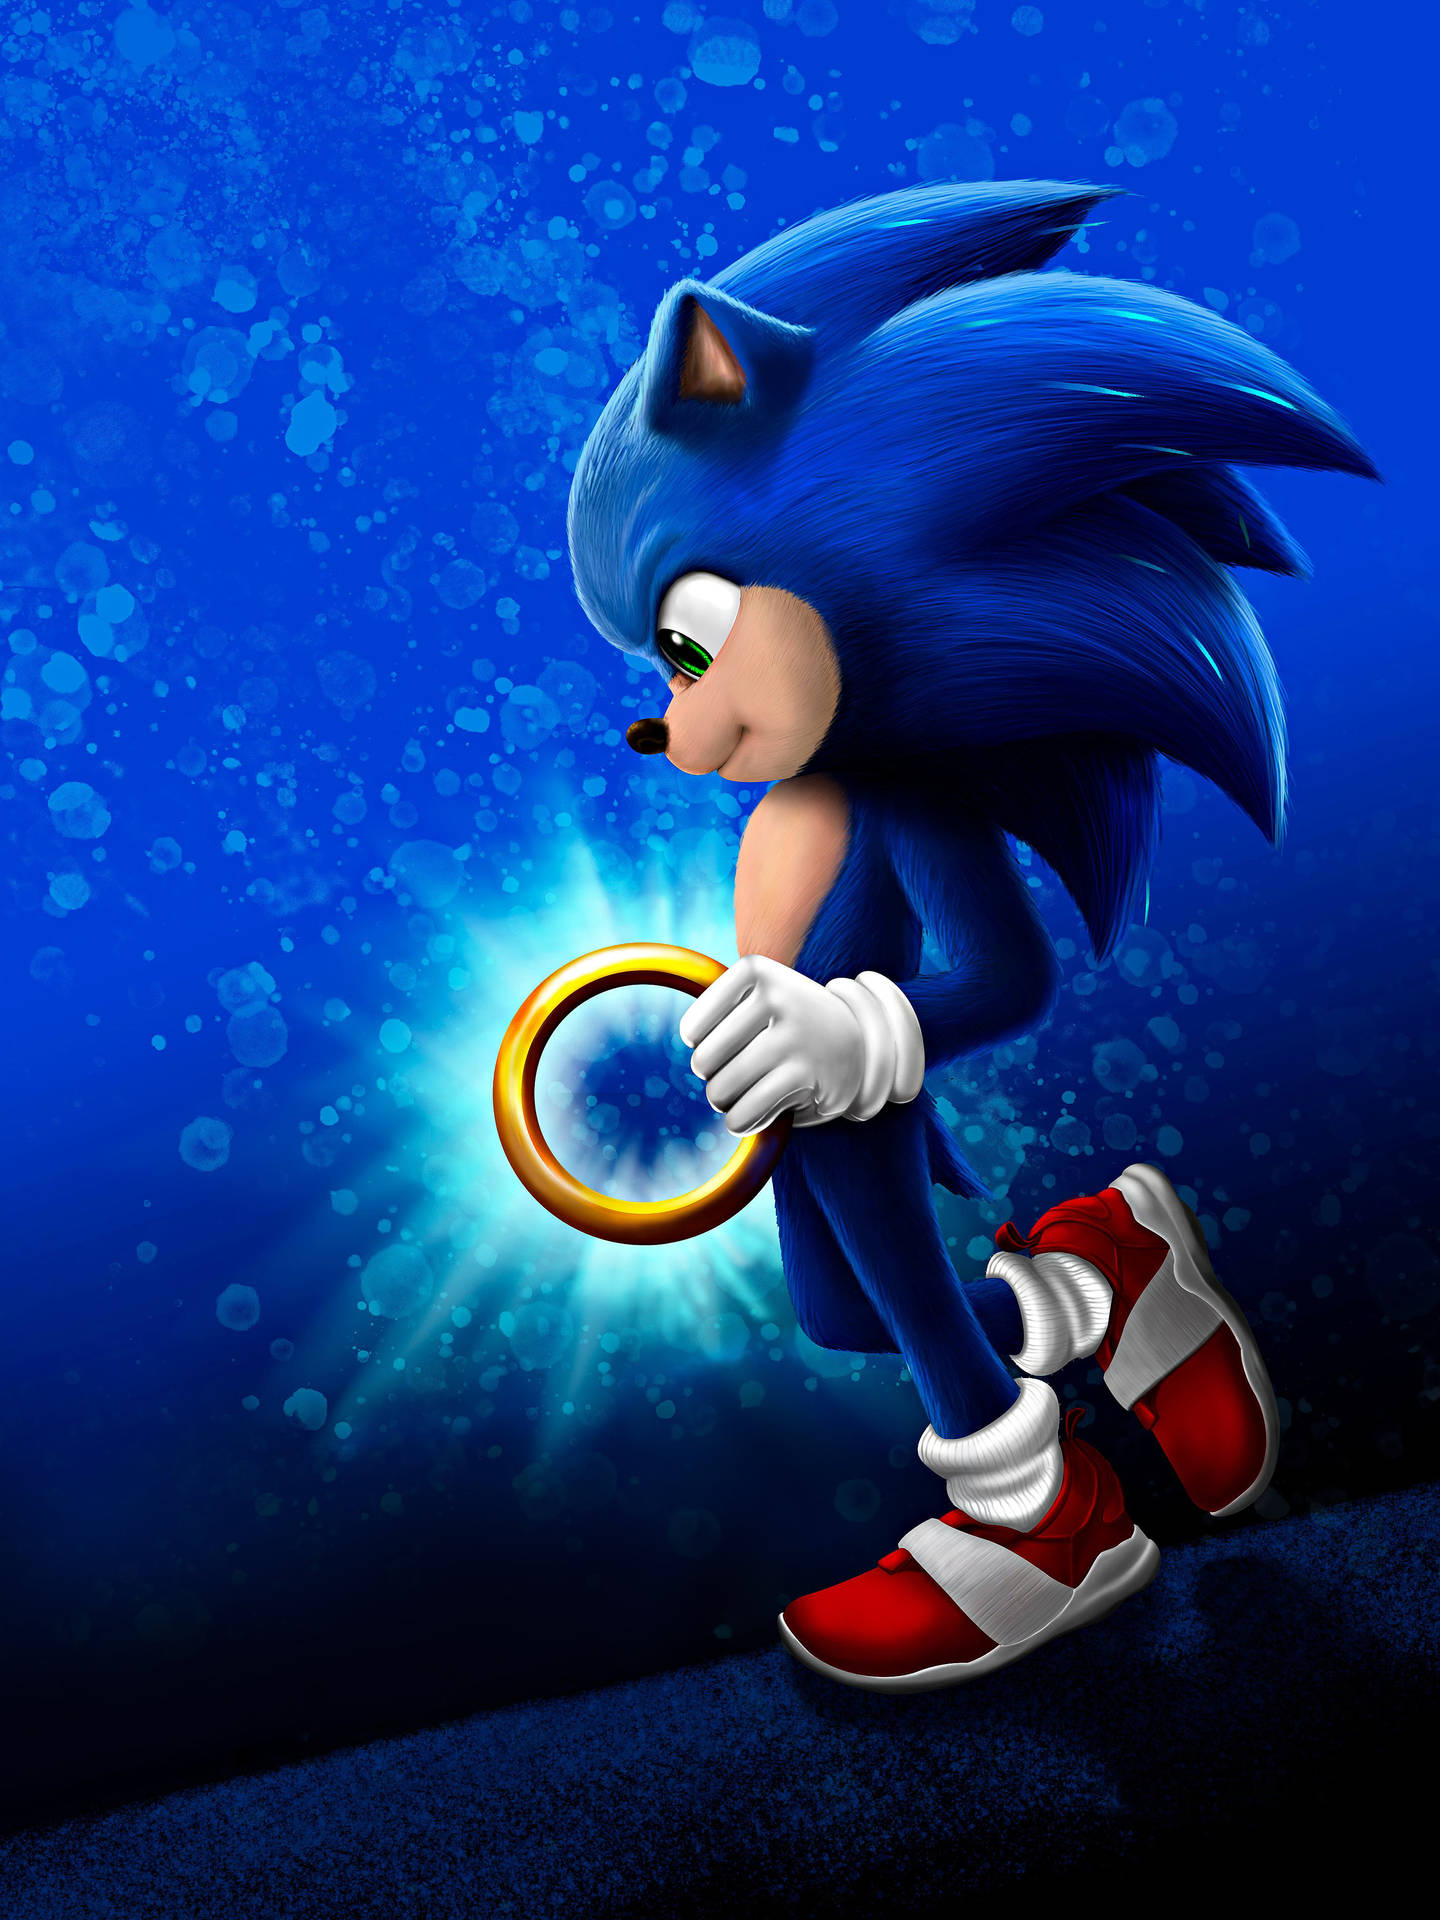 Sonic The Hedgehog With A Glowing Ring Background